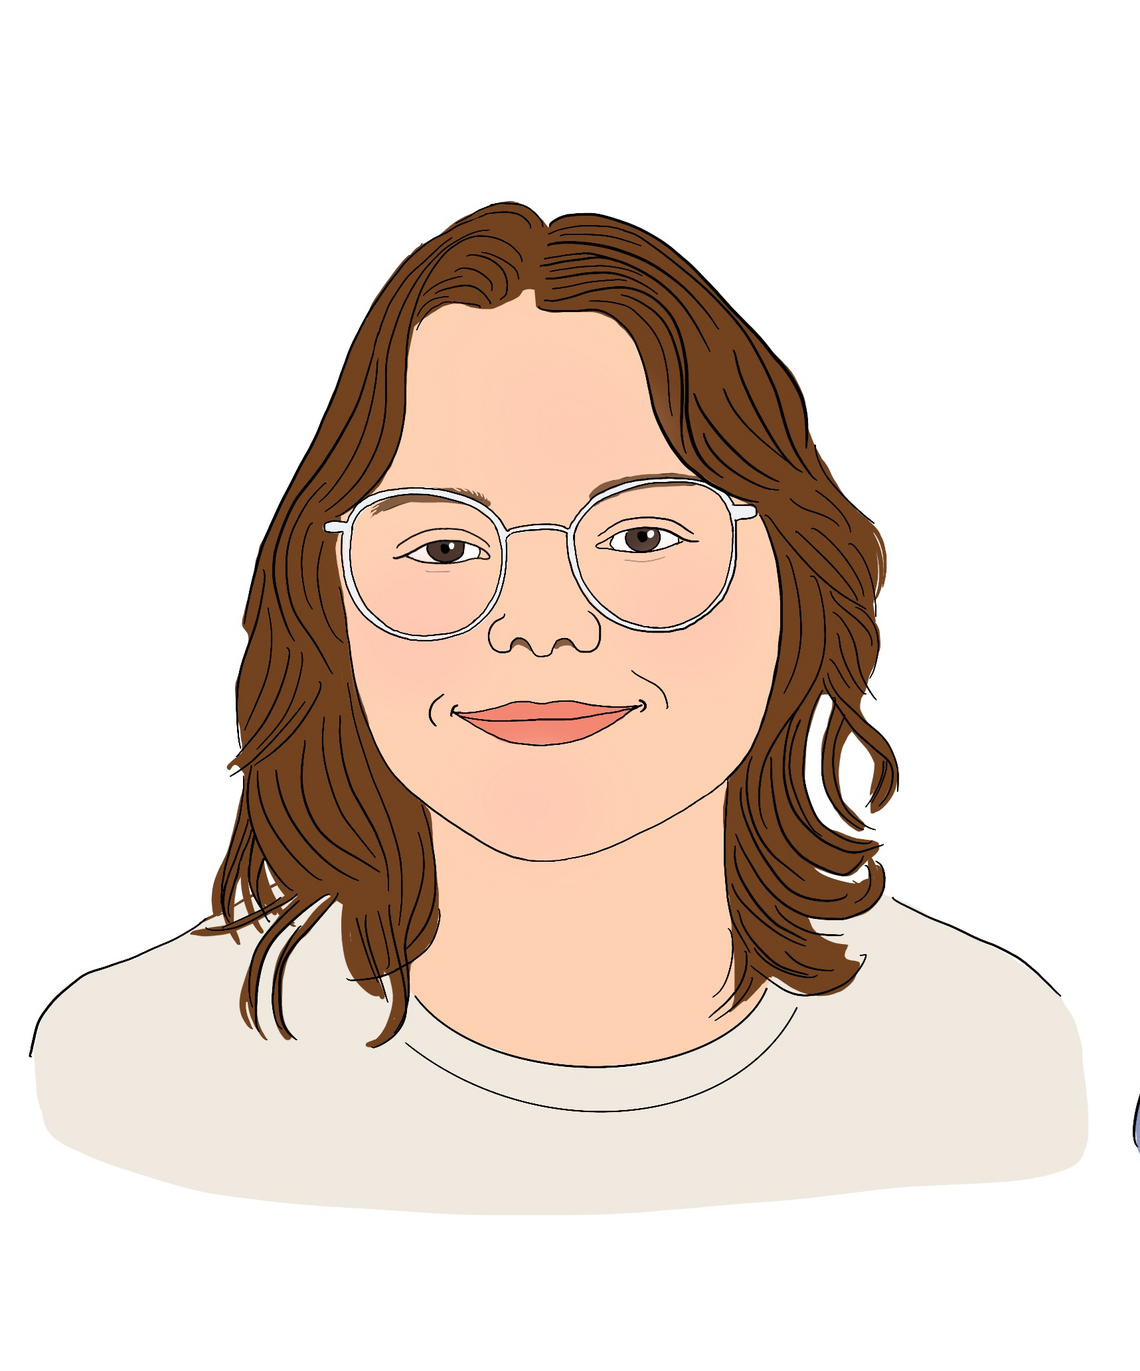 Ameilia Illustration - a white woman with short brown hair and round glasses smiling.